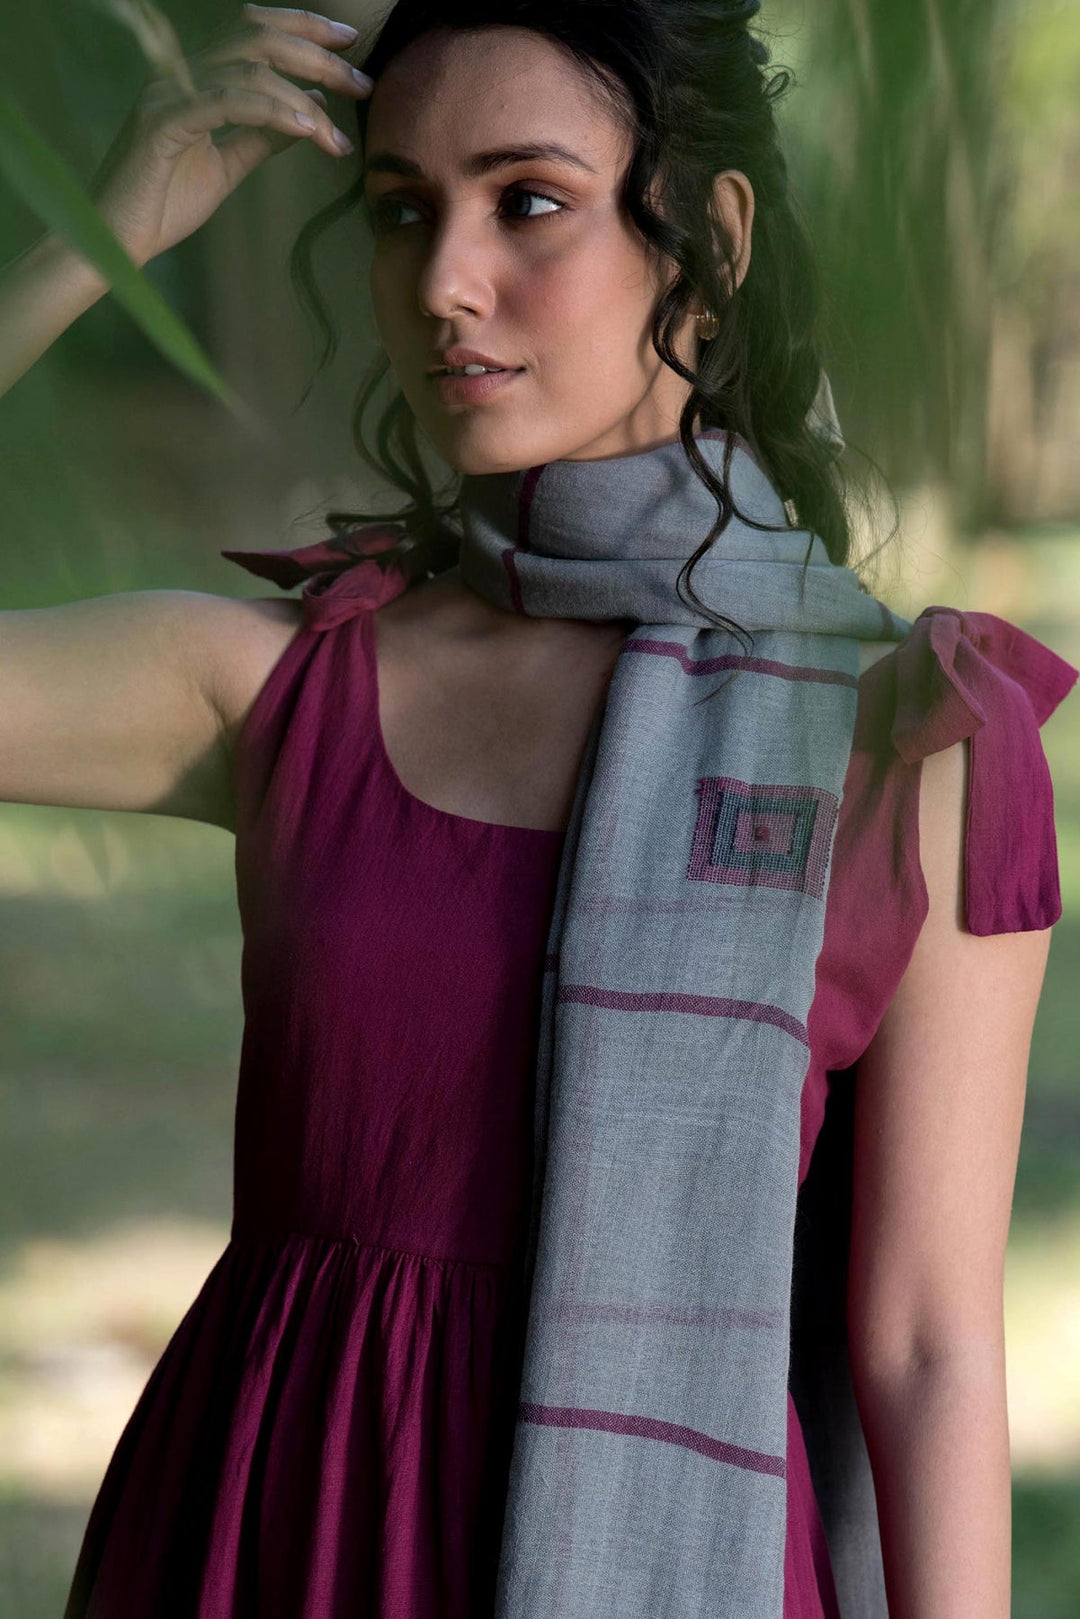 Maroon Cotton Dress with Tie-up Shoulder | Asami Cotton Dress - Maroon